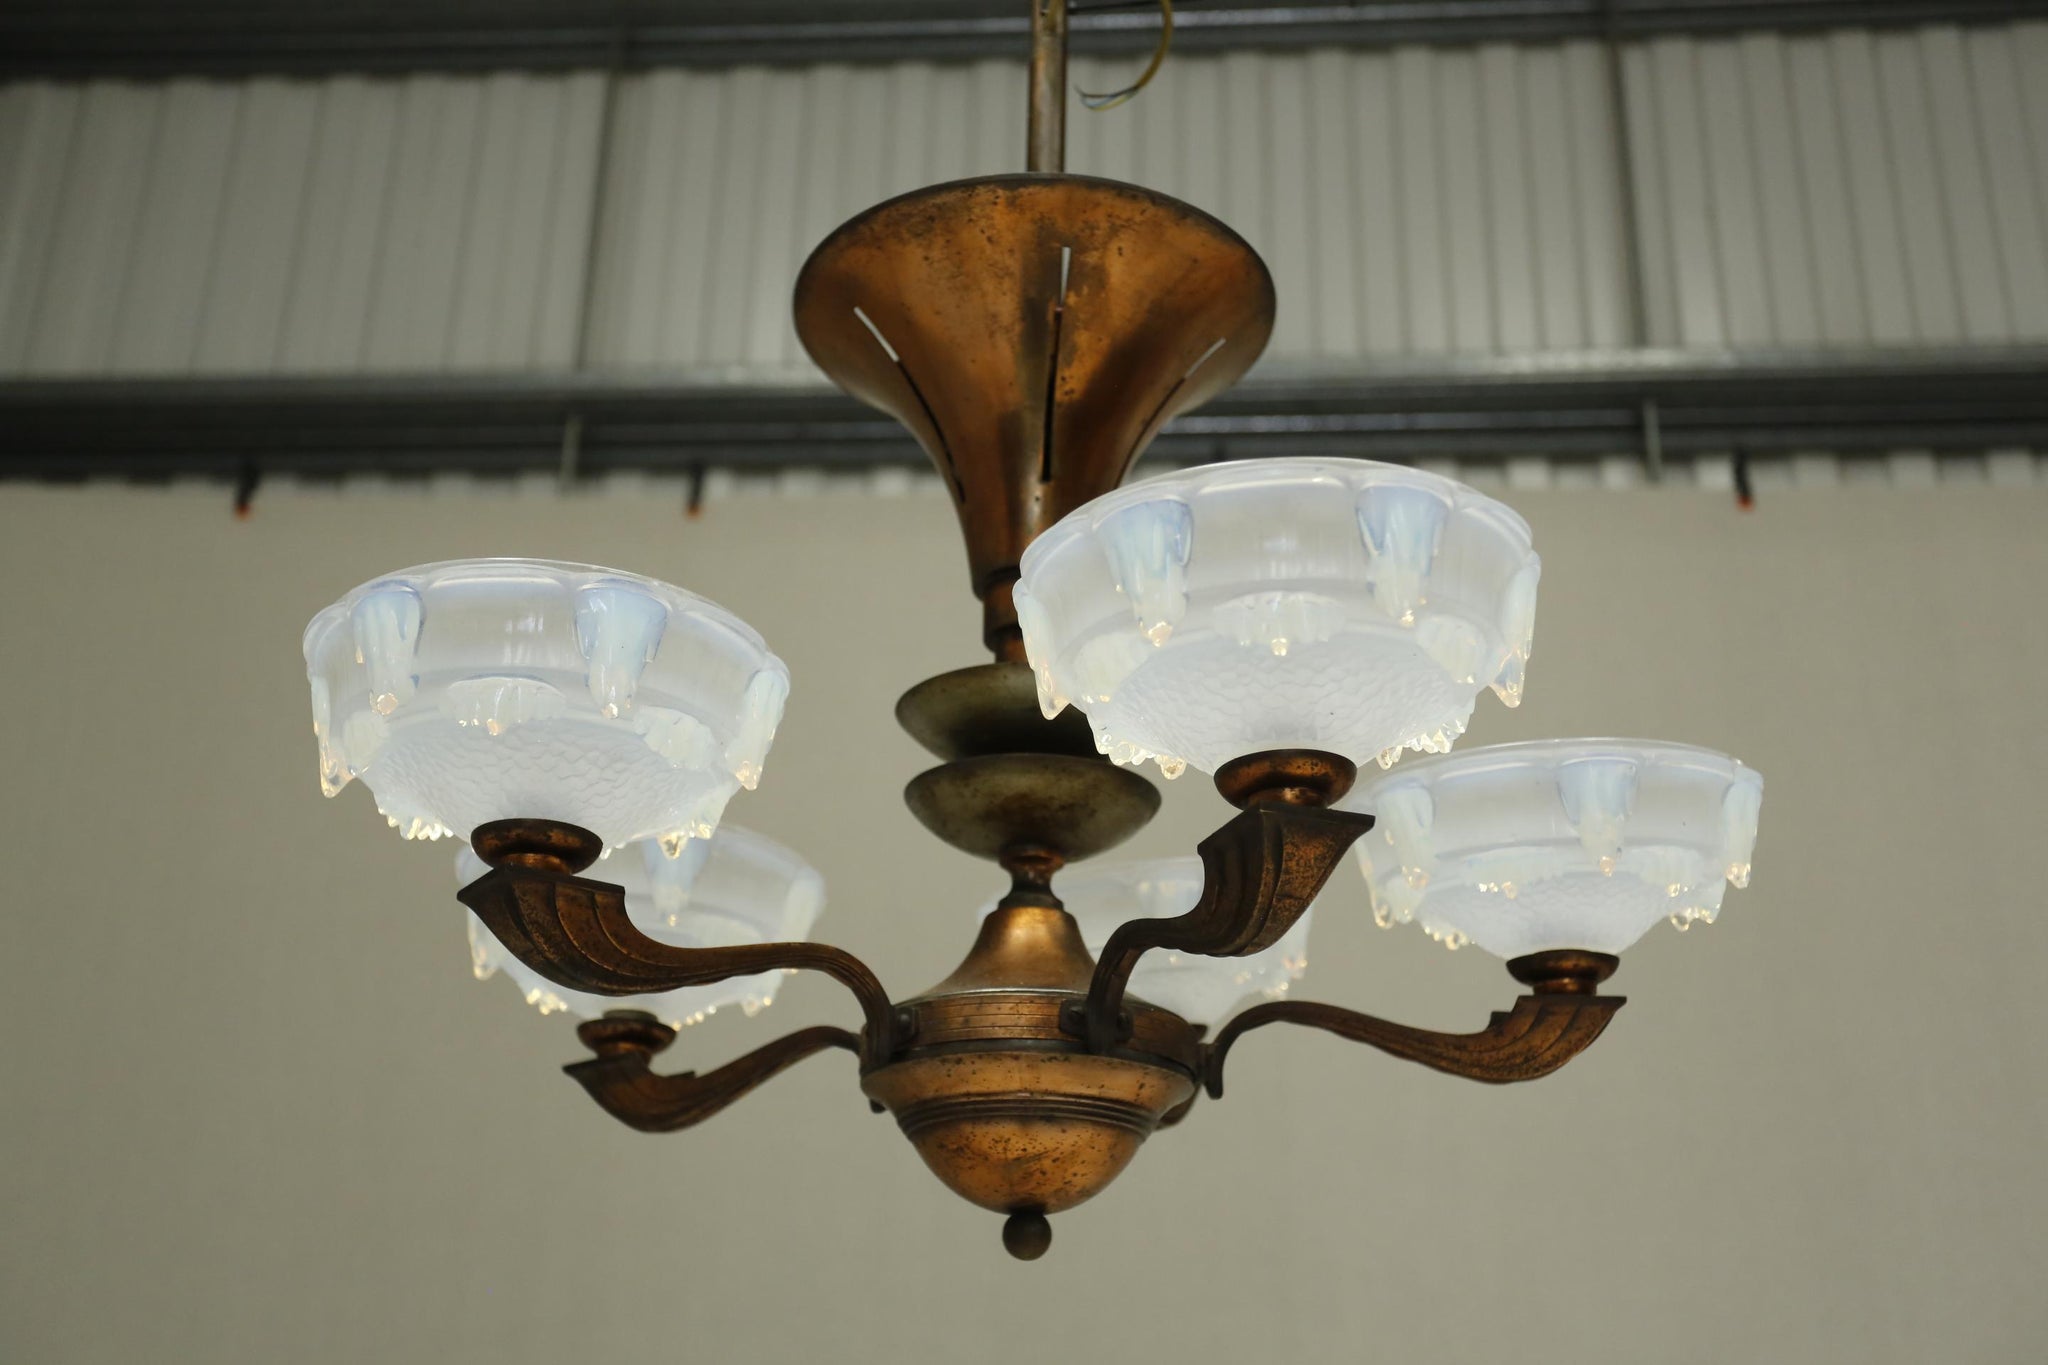 Art deco Copper chandelier with vaseline glass shades- 5 arm